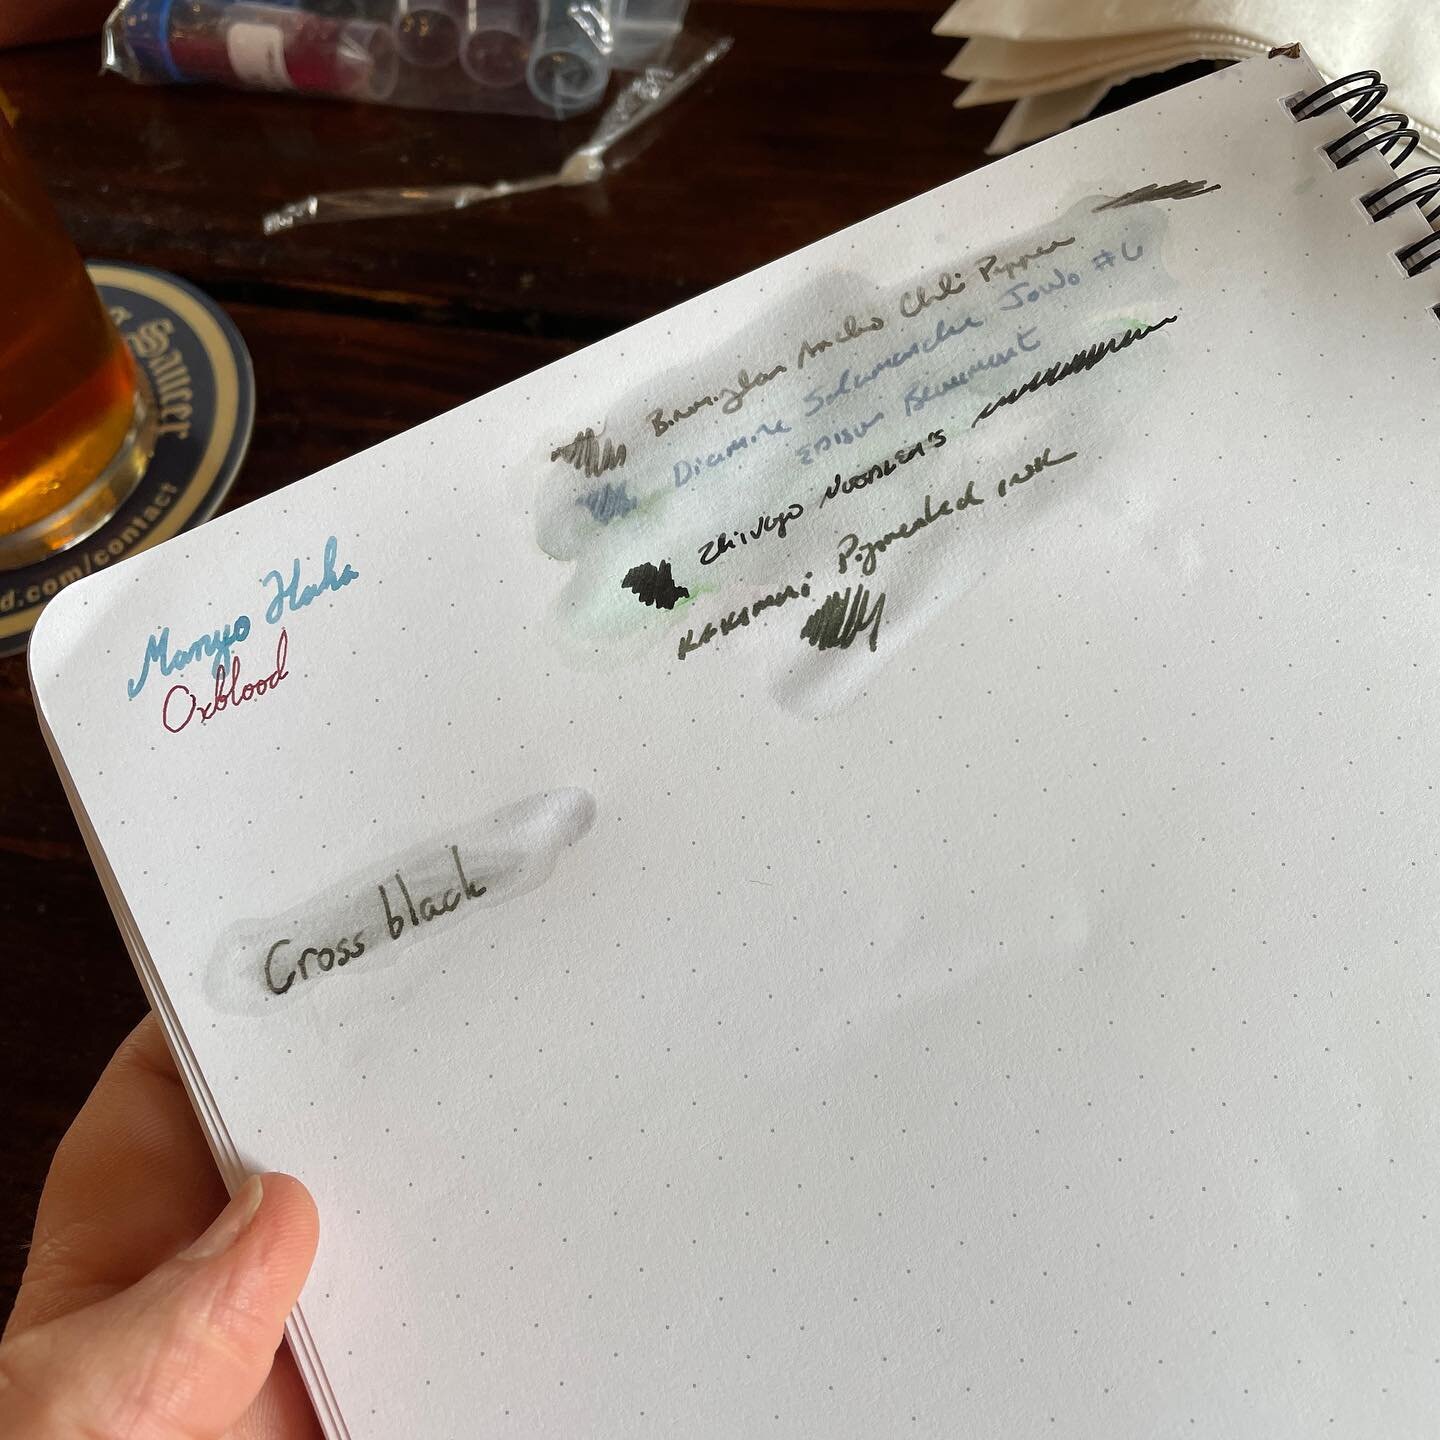 Today&rsquo;s blog post follows up on last week&rsquo;s water-test experiment at pen club. I discuss how whether an ink is waterproof or not really isn&rsquo;t important to me, since I don&rsquo;t typically use my fountain pens for legal documents or